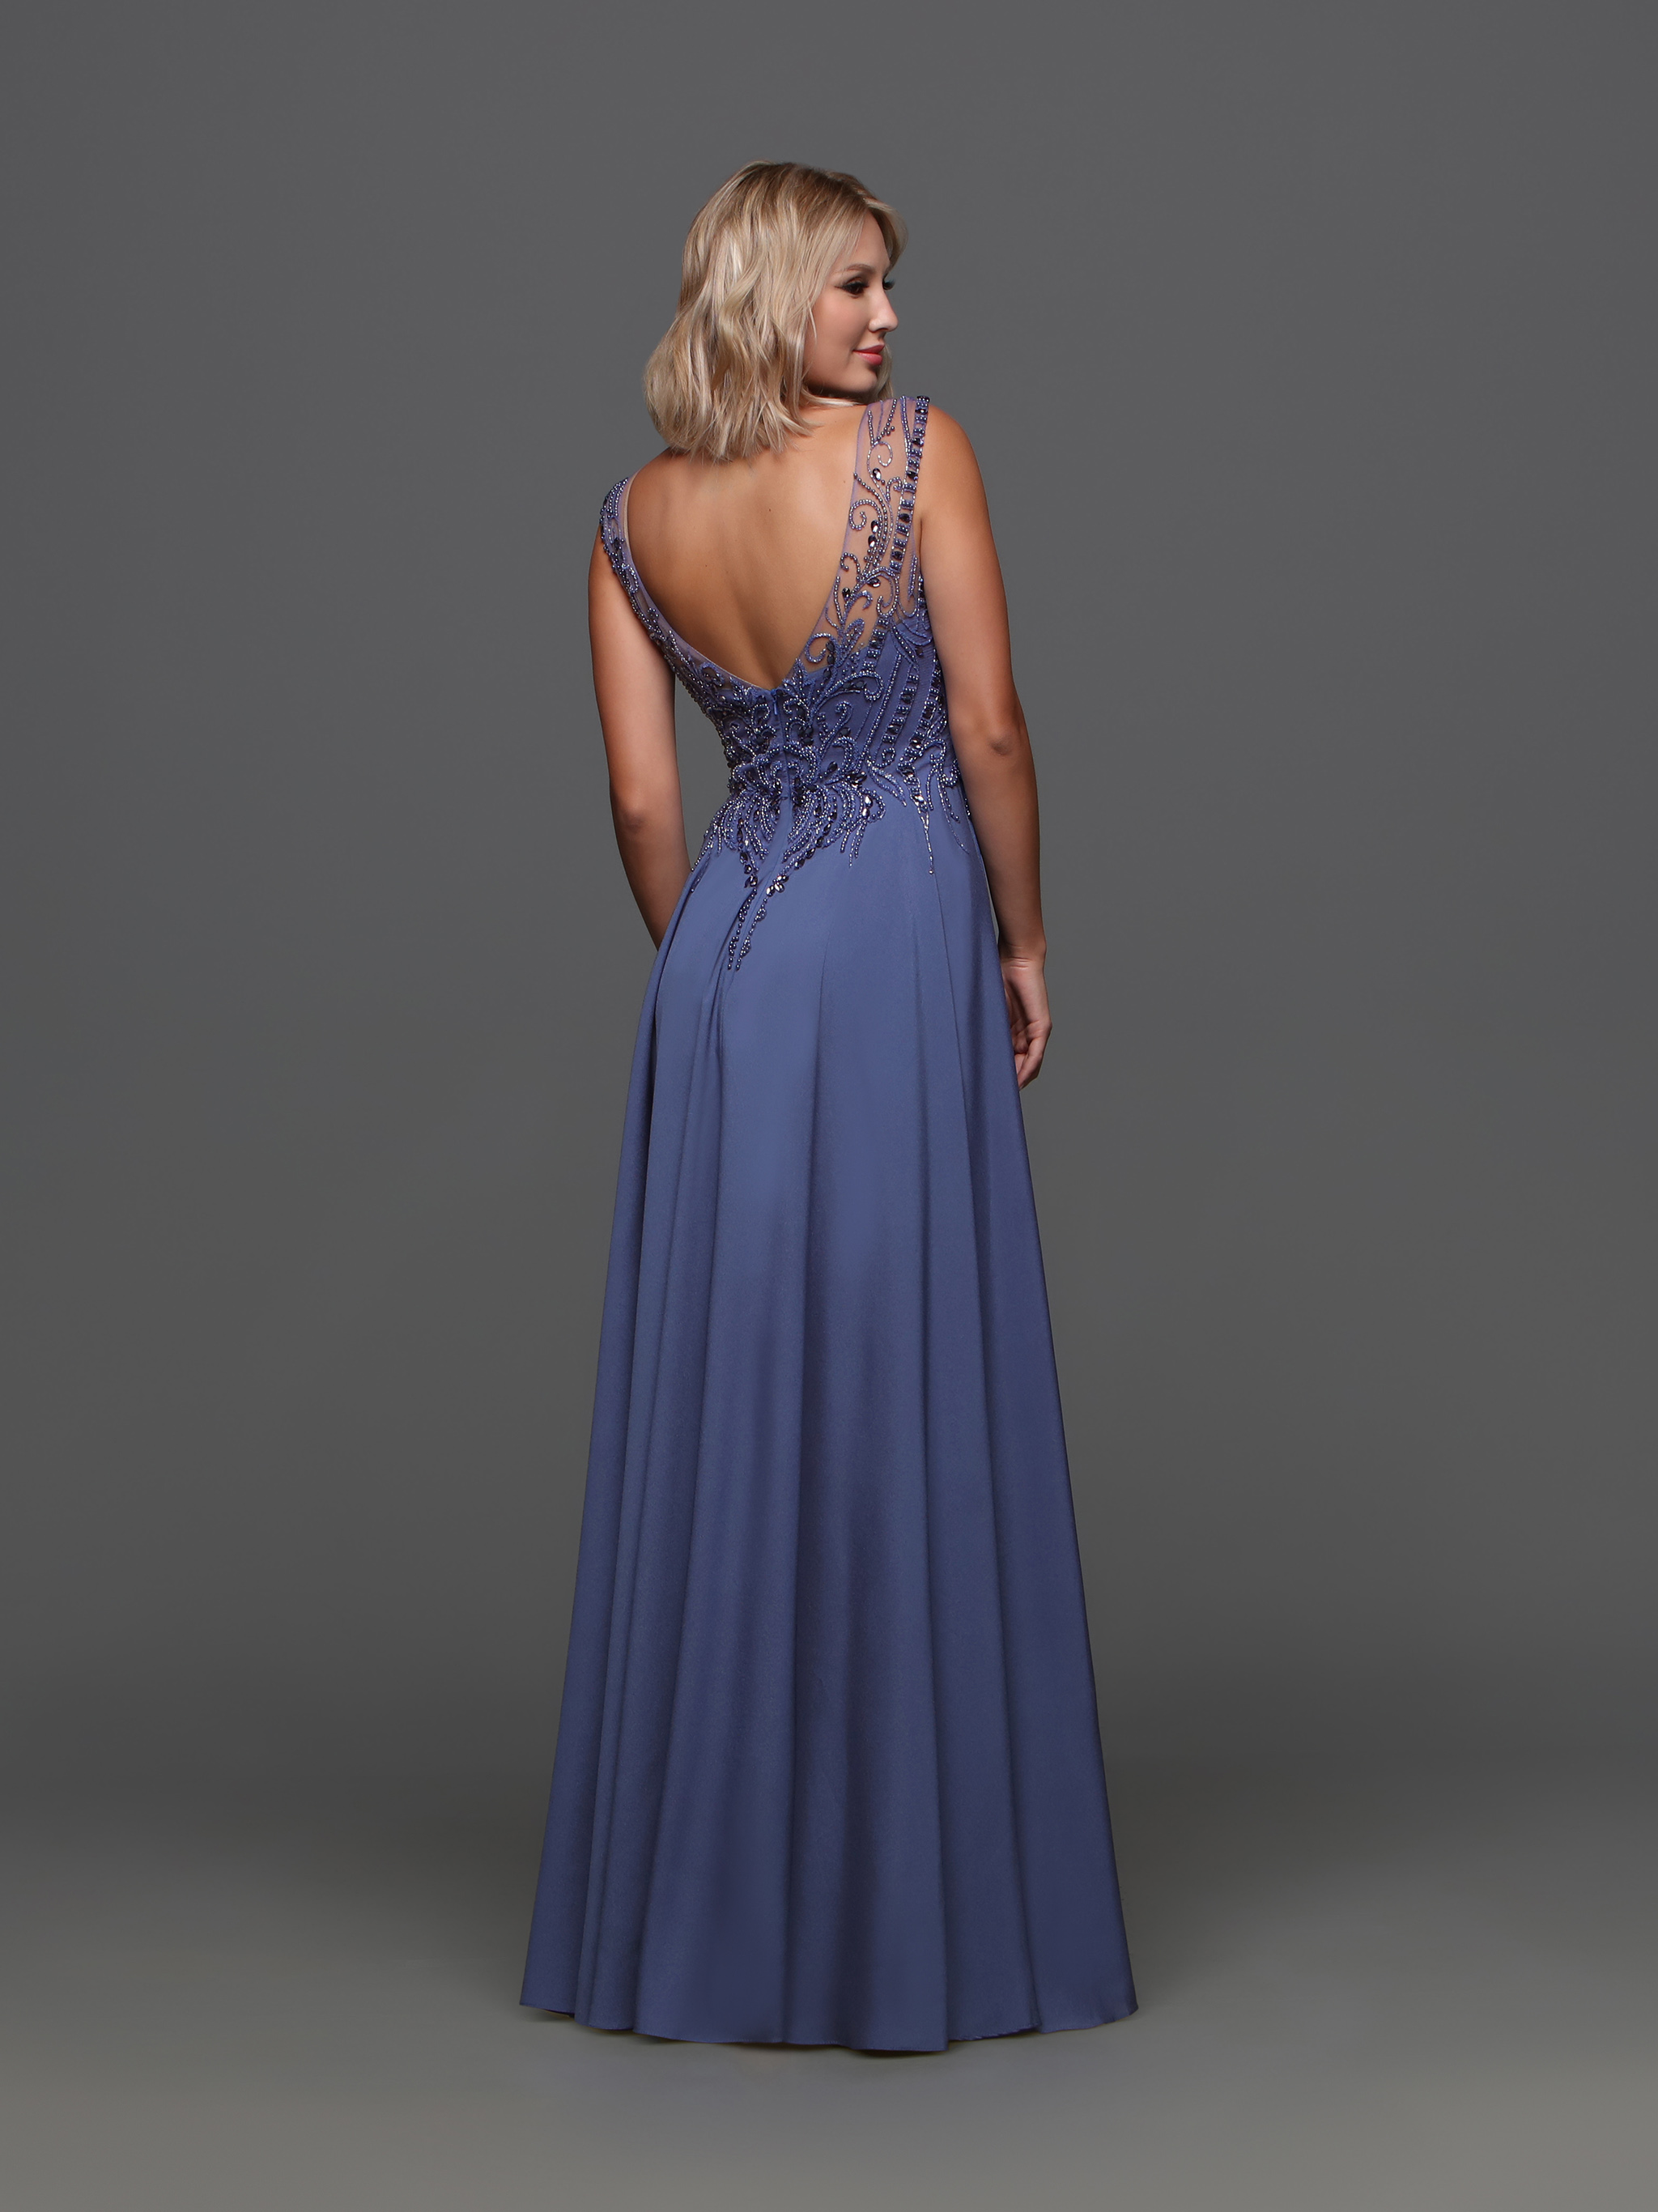 Image showing back view of style #60631